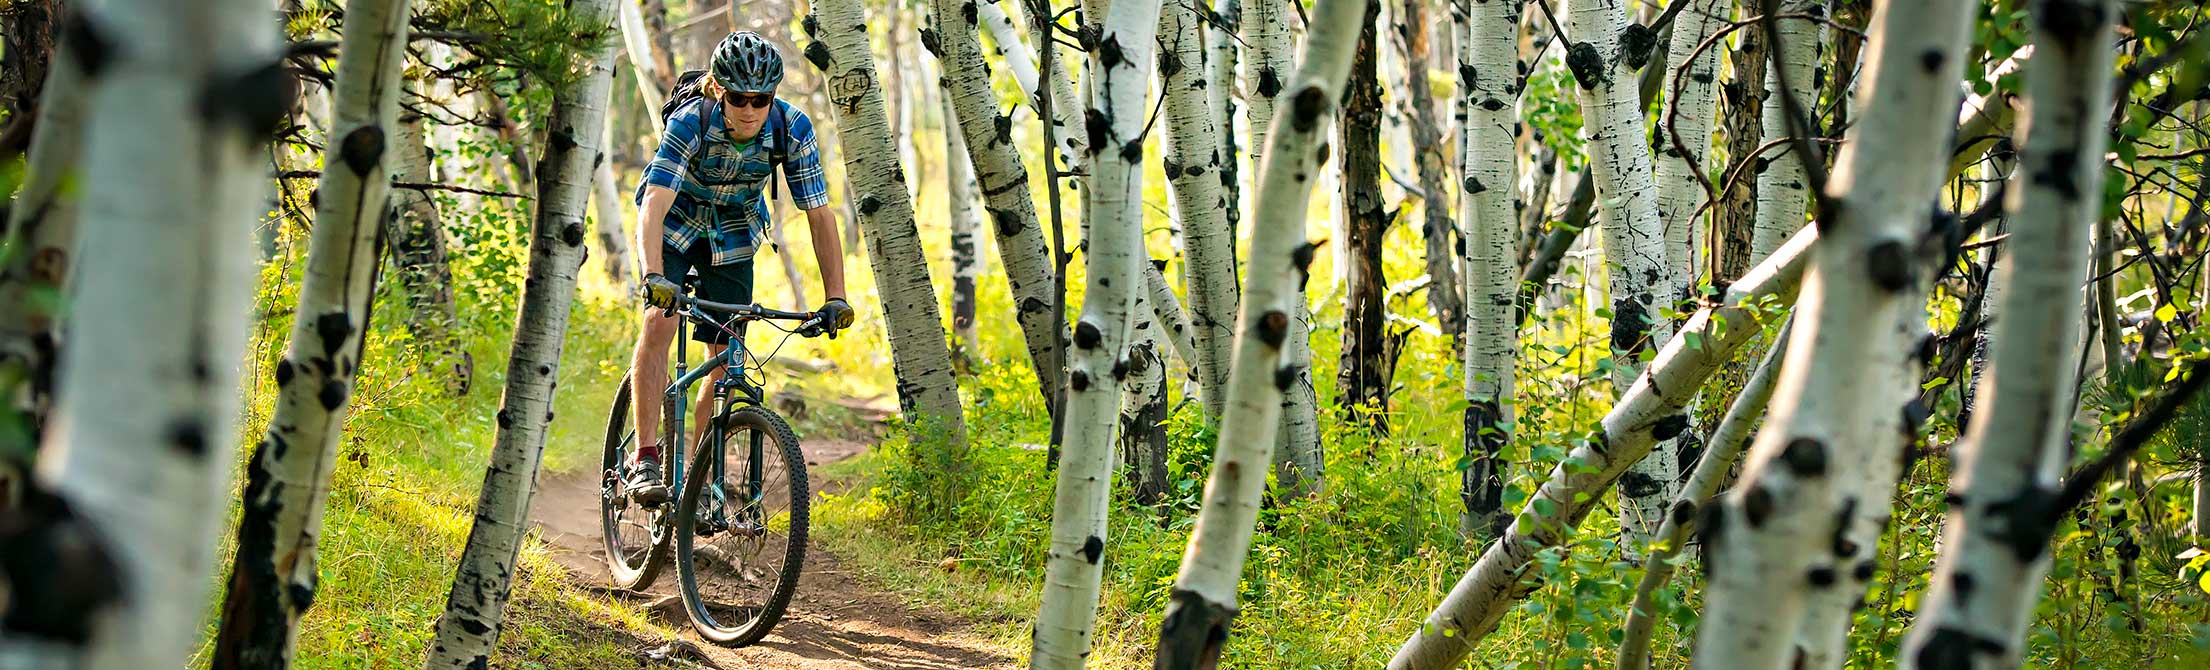 guy riding bike in the woods